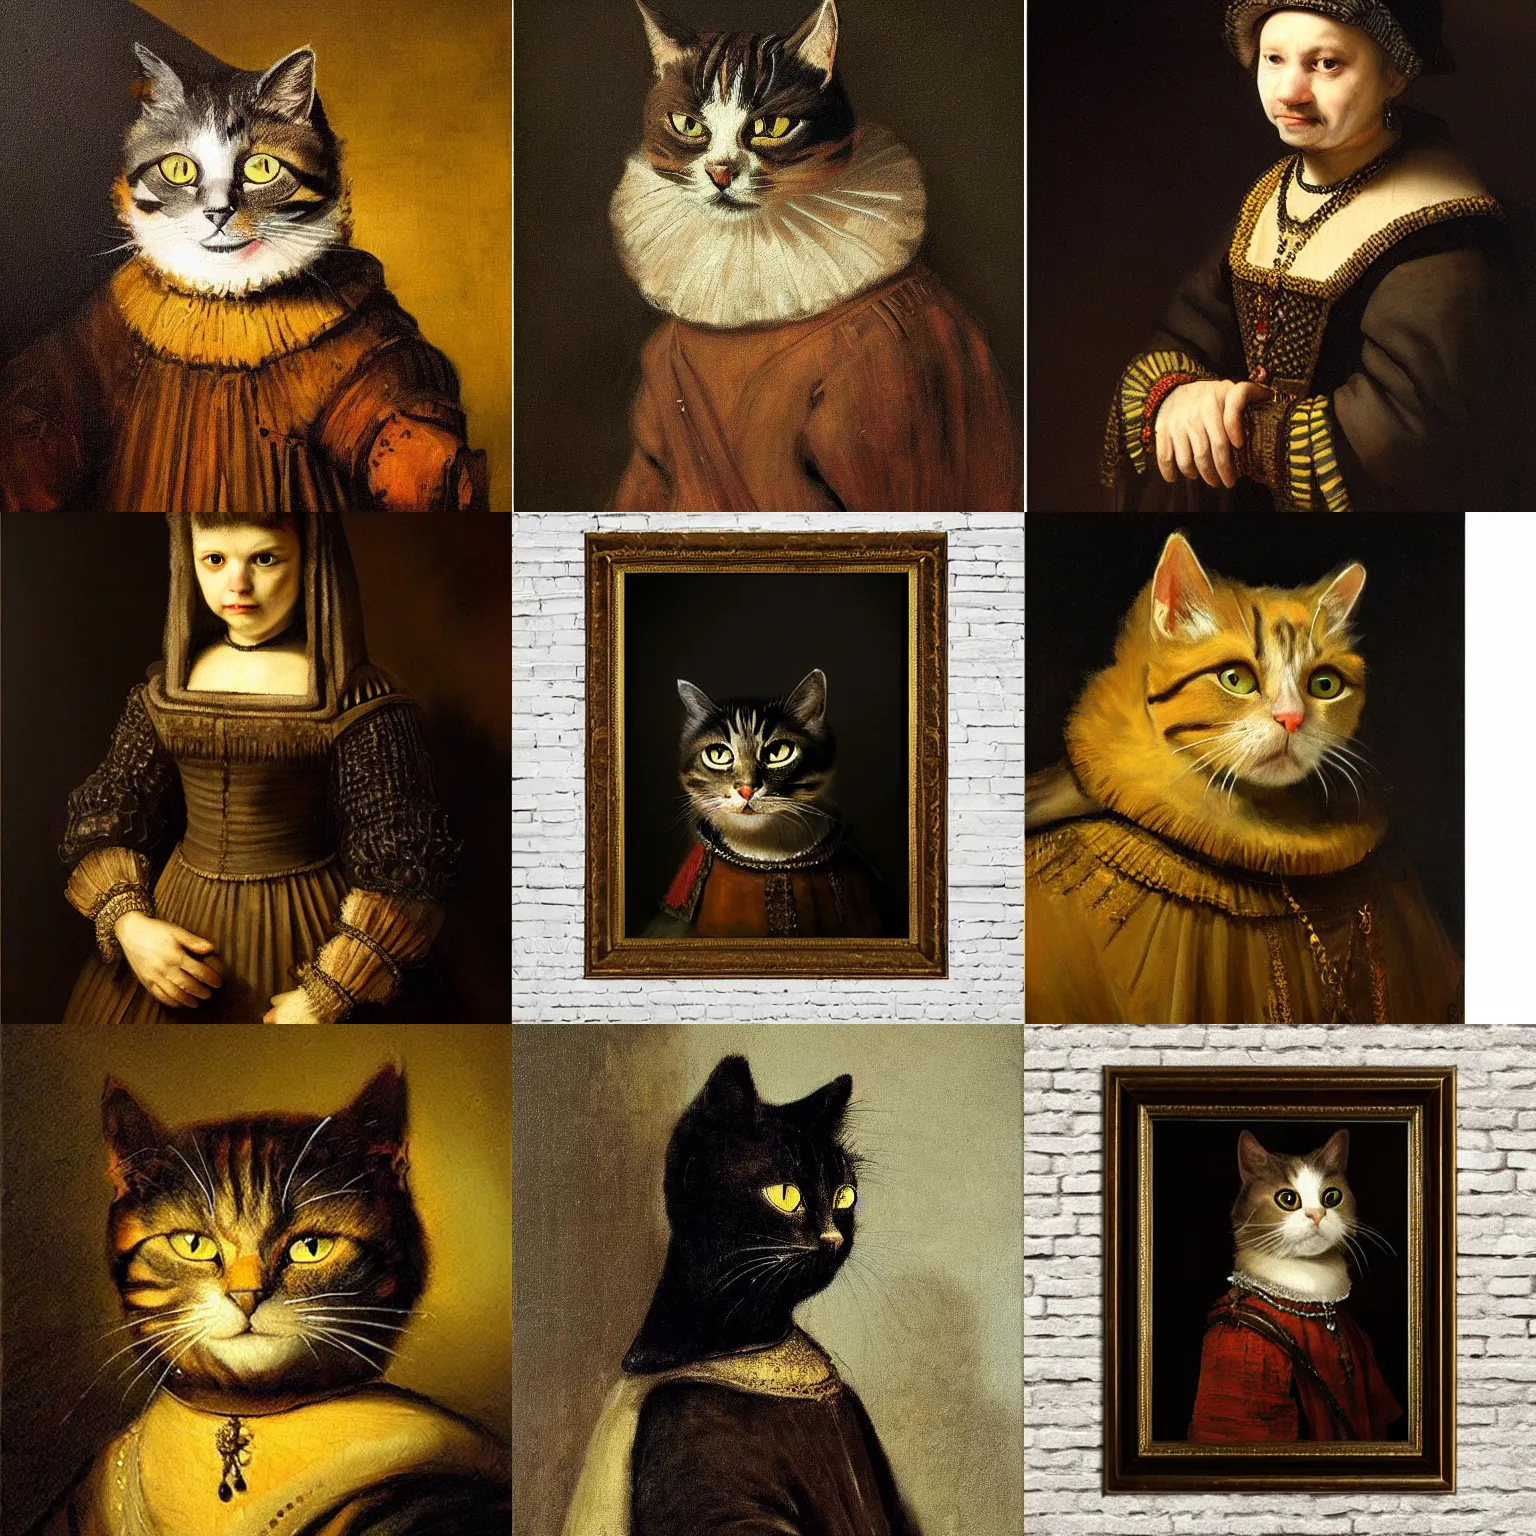 Prompt: high quality oil painting portrait of cat wearing medieval dress in dark background by Rembrandt, in the style of realism